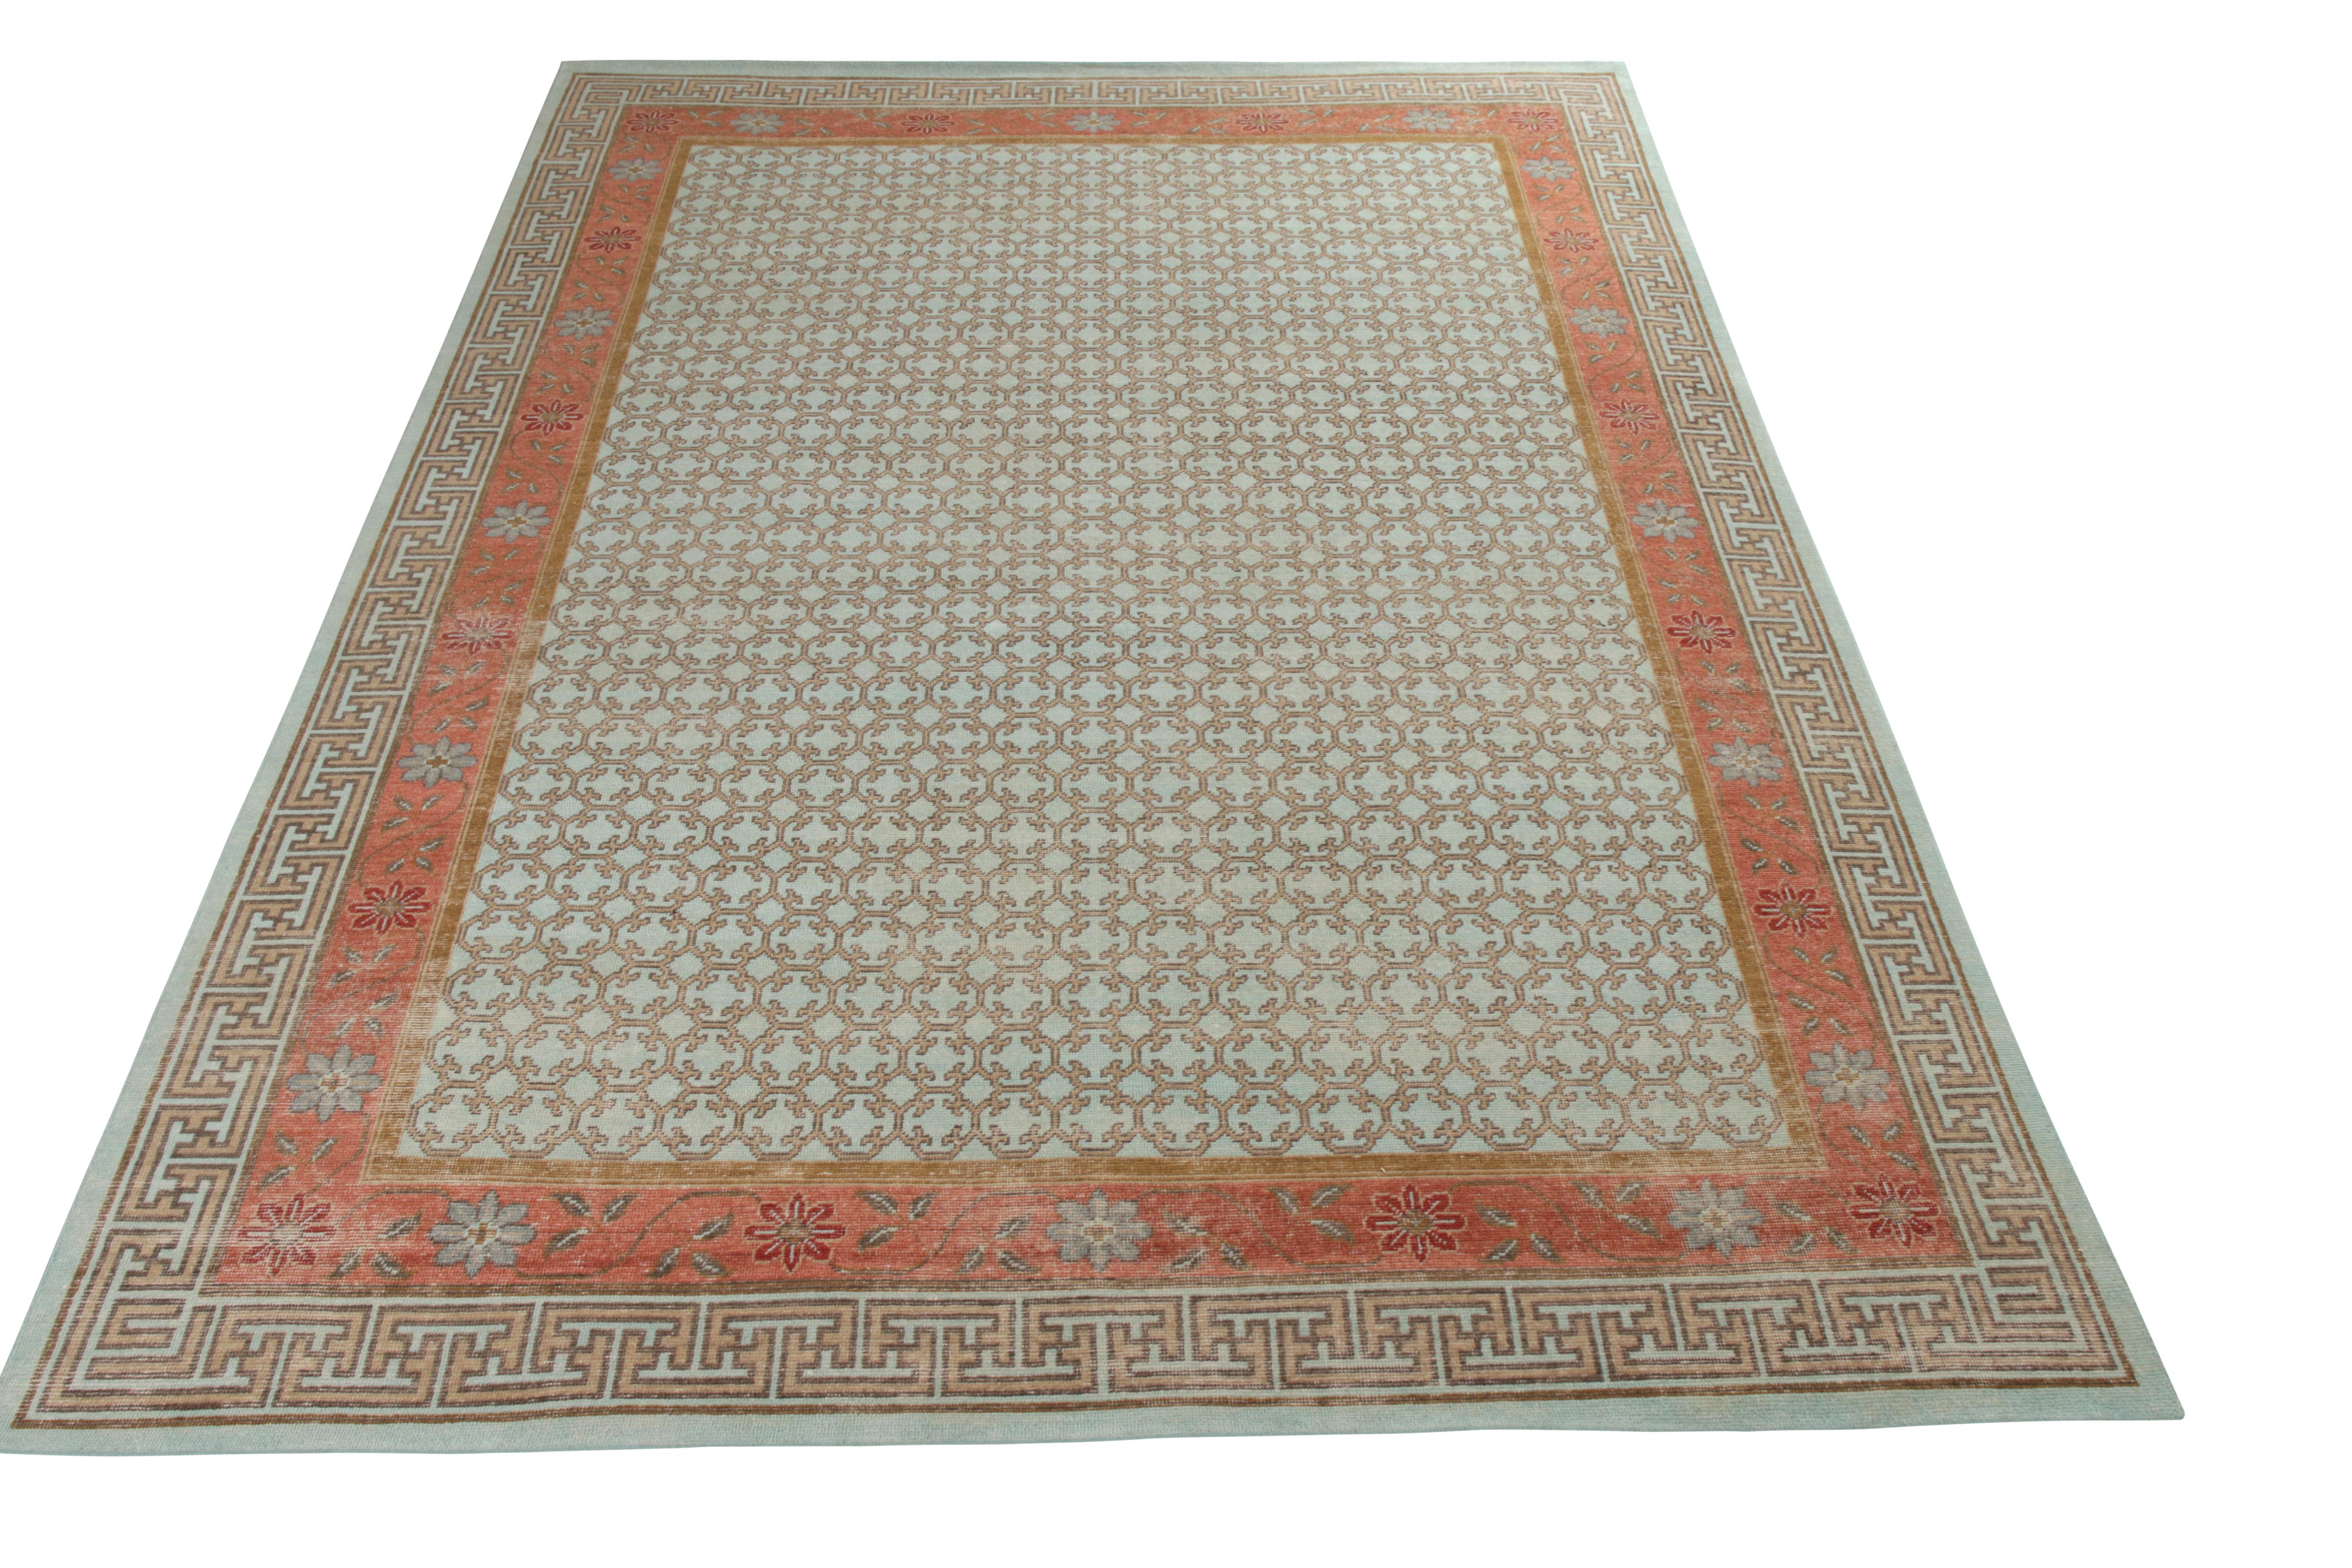 A 10 x 14 ode to celebrated Khotan rug styles from the classic selections in Rug & Kilim’s Homage Collection. Hand knotted in wool with a shabby-chic, distressed texture, enjoying complementary blue and red-orange hues. Further sporting a